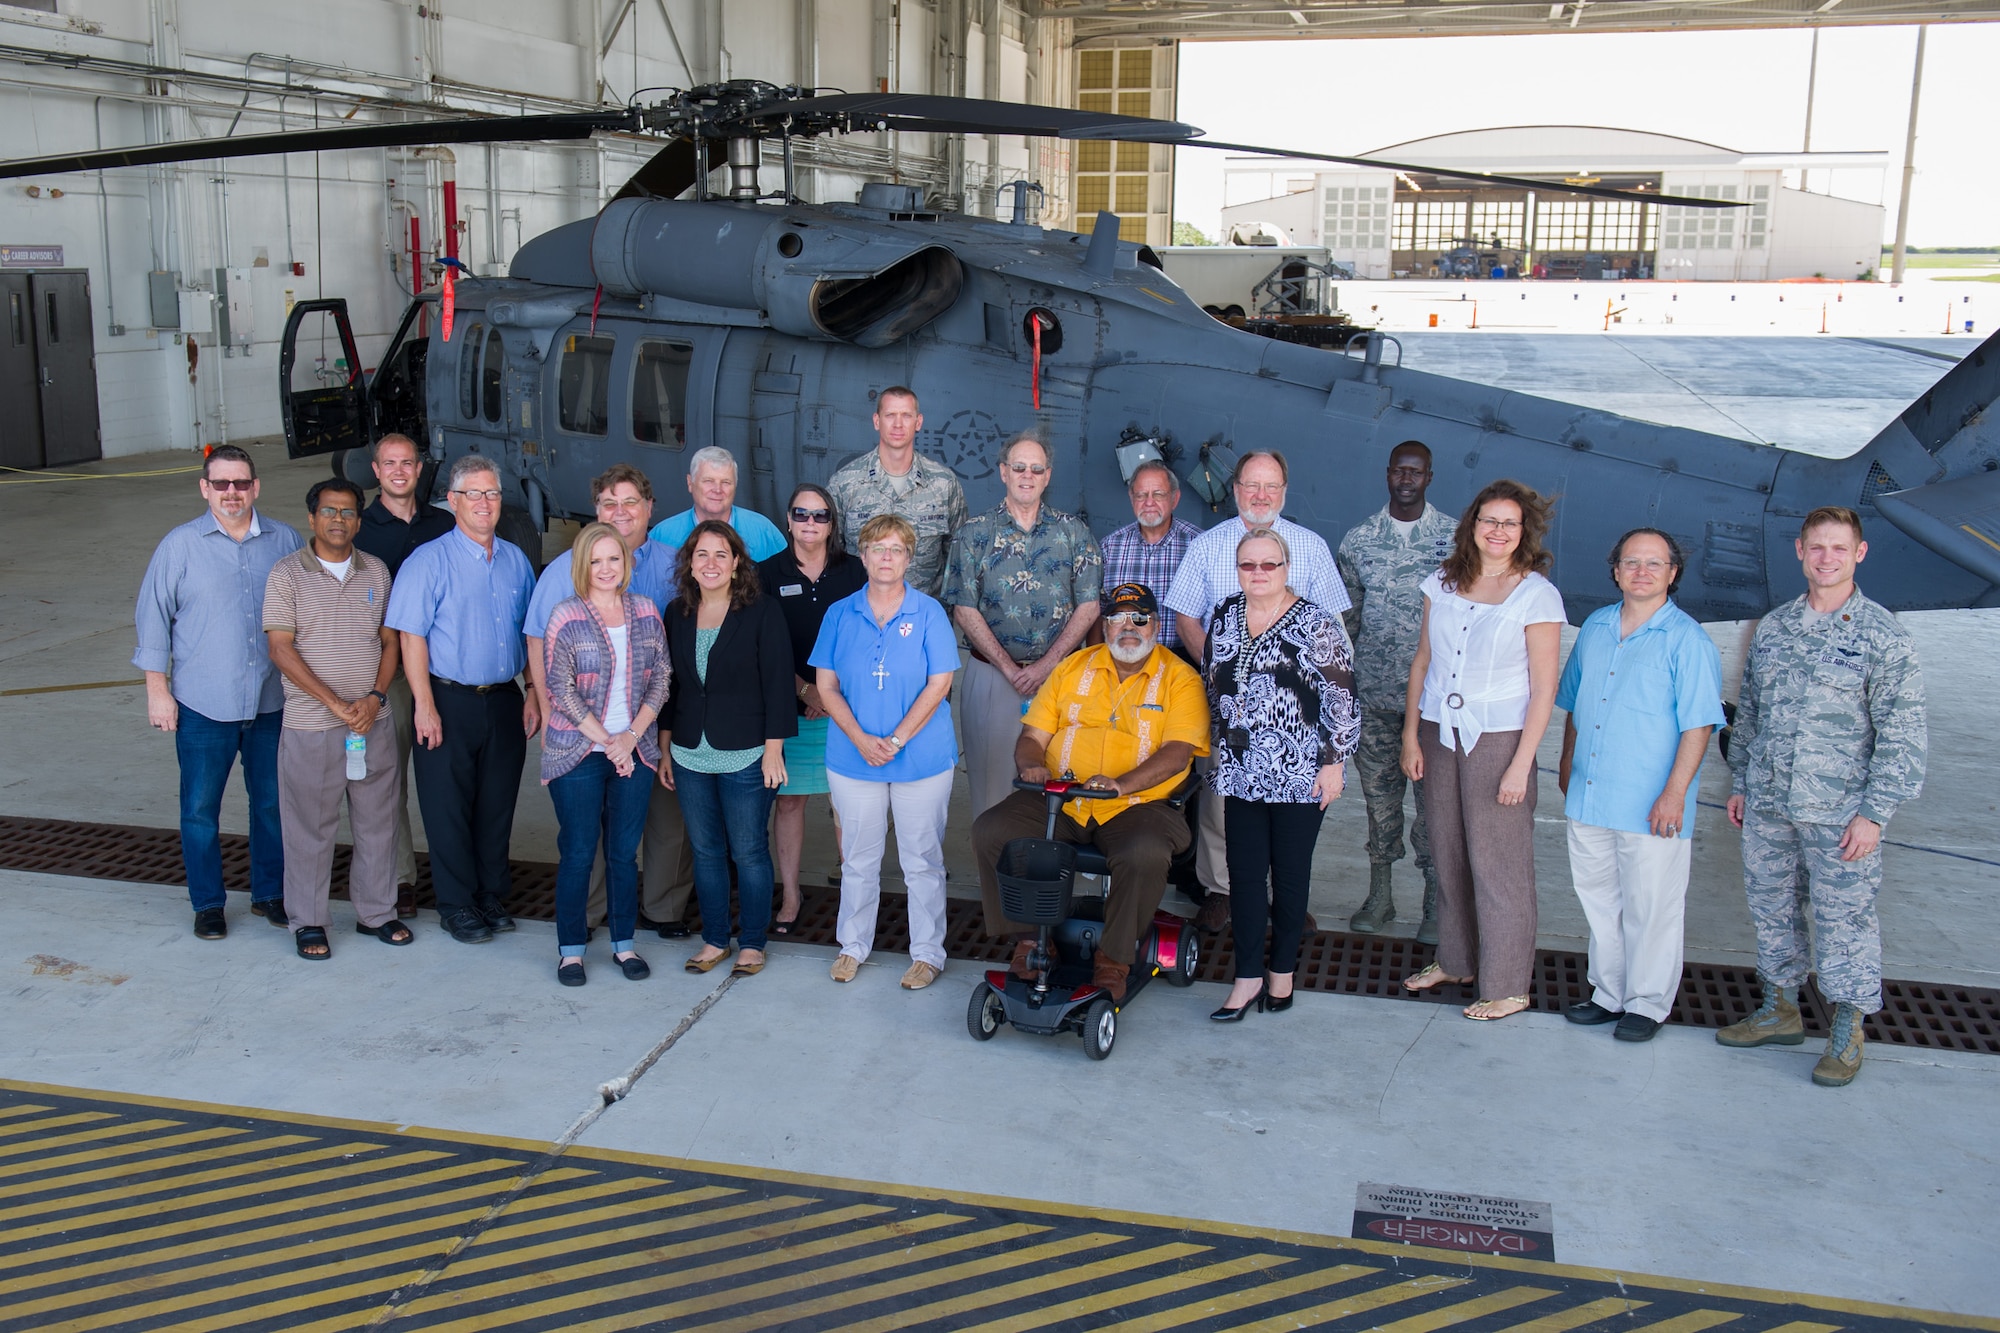 More than 20 local Space Coast clergy members pose for a photograph during Clergy Appreciation Day Aug. 29, 2016, at Patrick Air Force Base, Fla. The guests were provided with a spiritual seminar hosted by the 45th Space Wing and the 920th Rescue Wing where they learned more about both missions and the Airmen who carry them out. (U.S. Air Force photo/Benjamin Thacker)